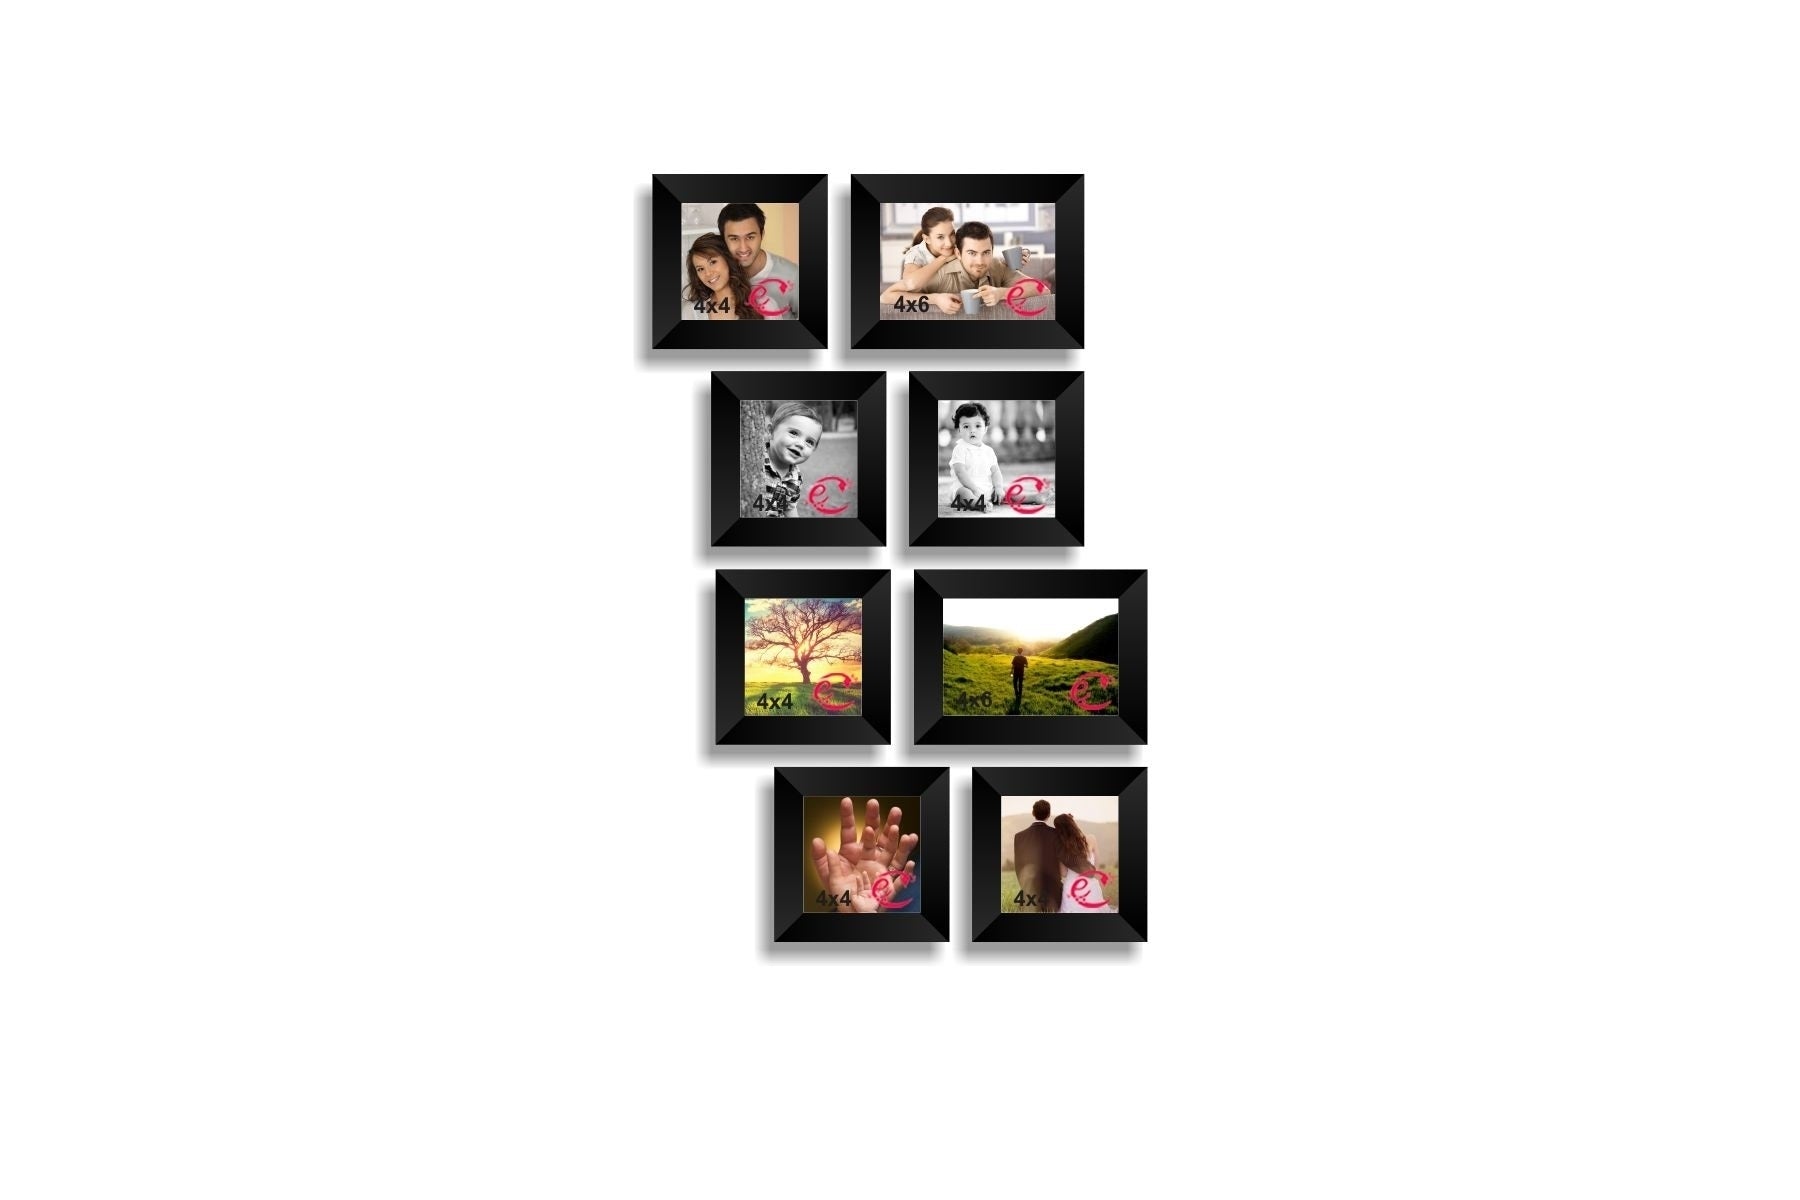 Memory Wall Collage Photo Frame Set of 8 individual photo frames